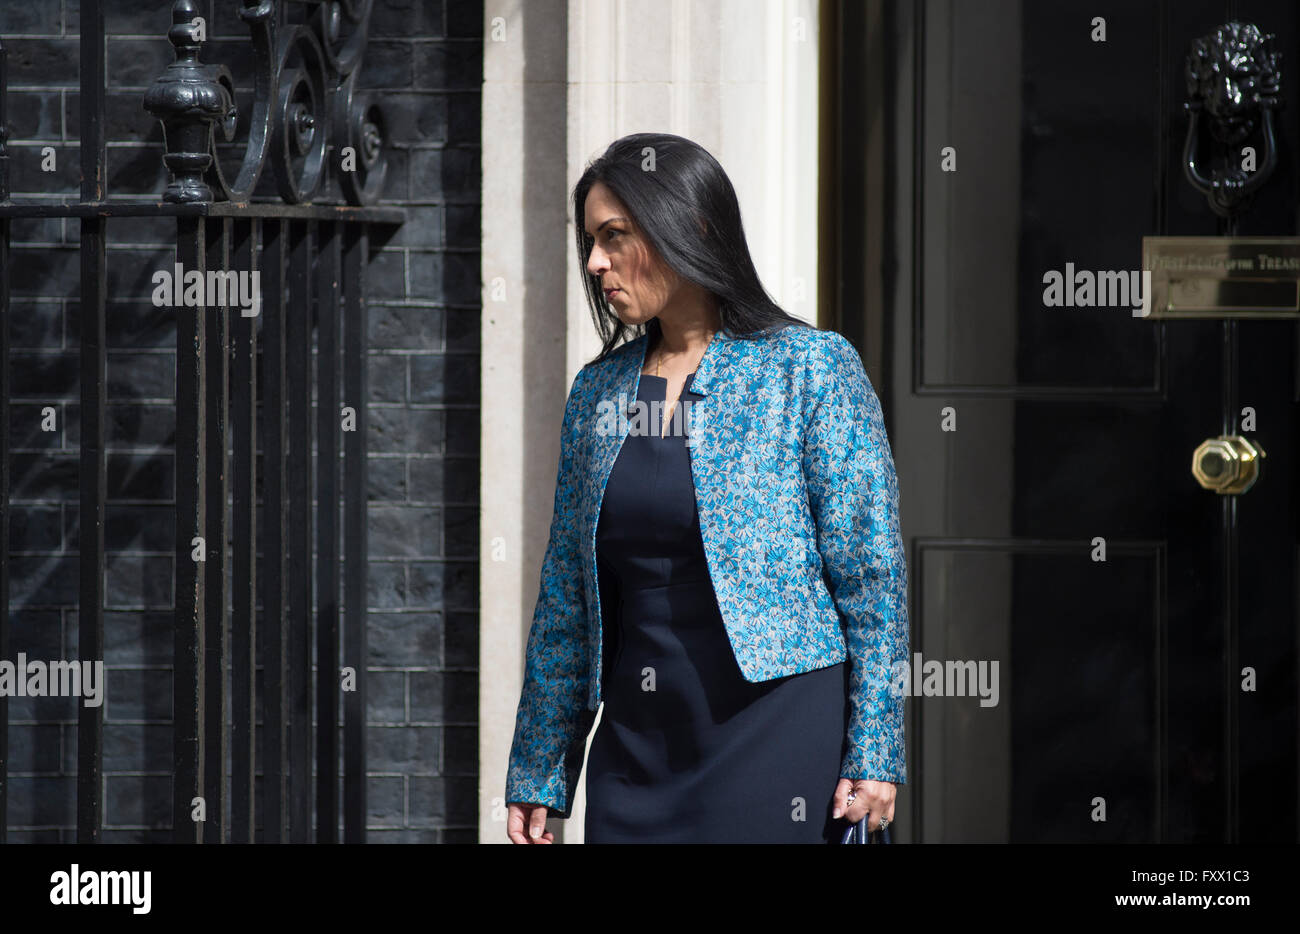 10 Downing Street, London, UK. 19th April, 2016. Minister of State for Employment Priti Patel MP leaves 10 Downing Street after weekly Cabinet Meeting. In November 2017 she resigned as Secretary of State for International Development following newspaper disclosures. Credit: Malcolm Park/Alamy Live News. Stock Photo